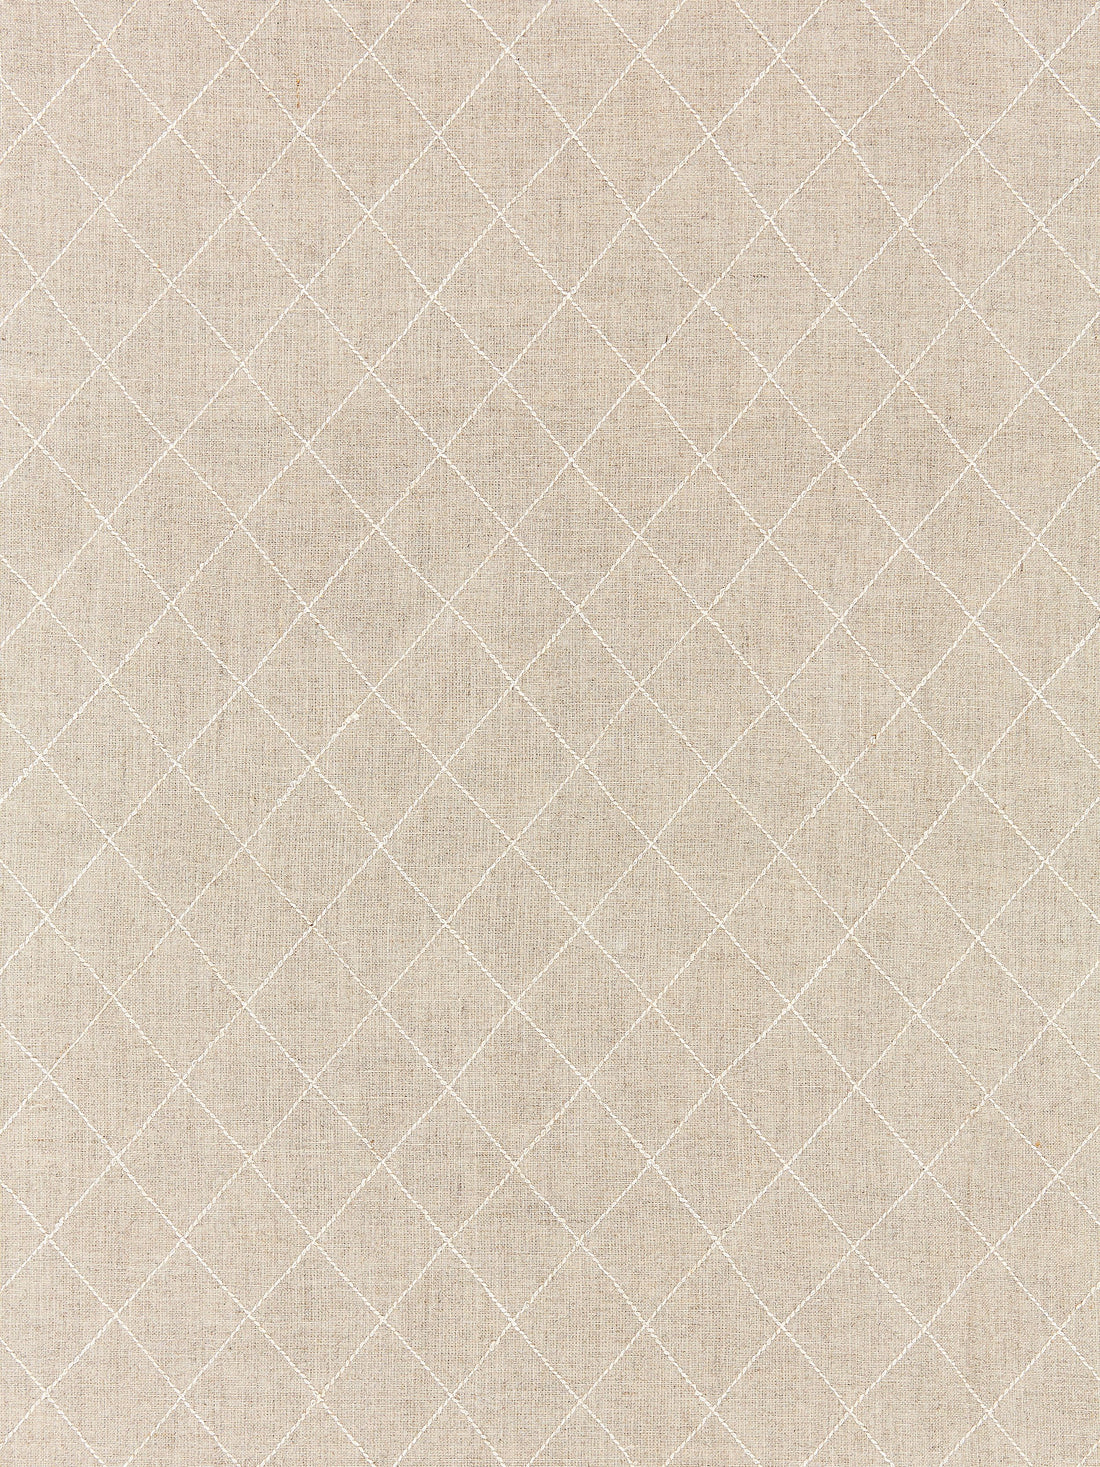 Counterpane fabric in natural color - pattern number SC 000127150 - by Scalamandre in the Scalamandre Fabrics Book 1 collection